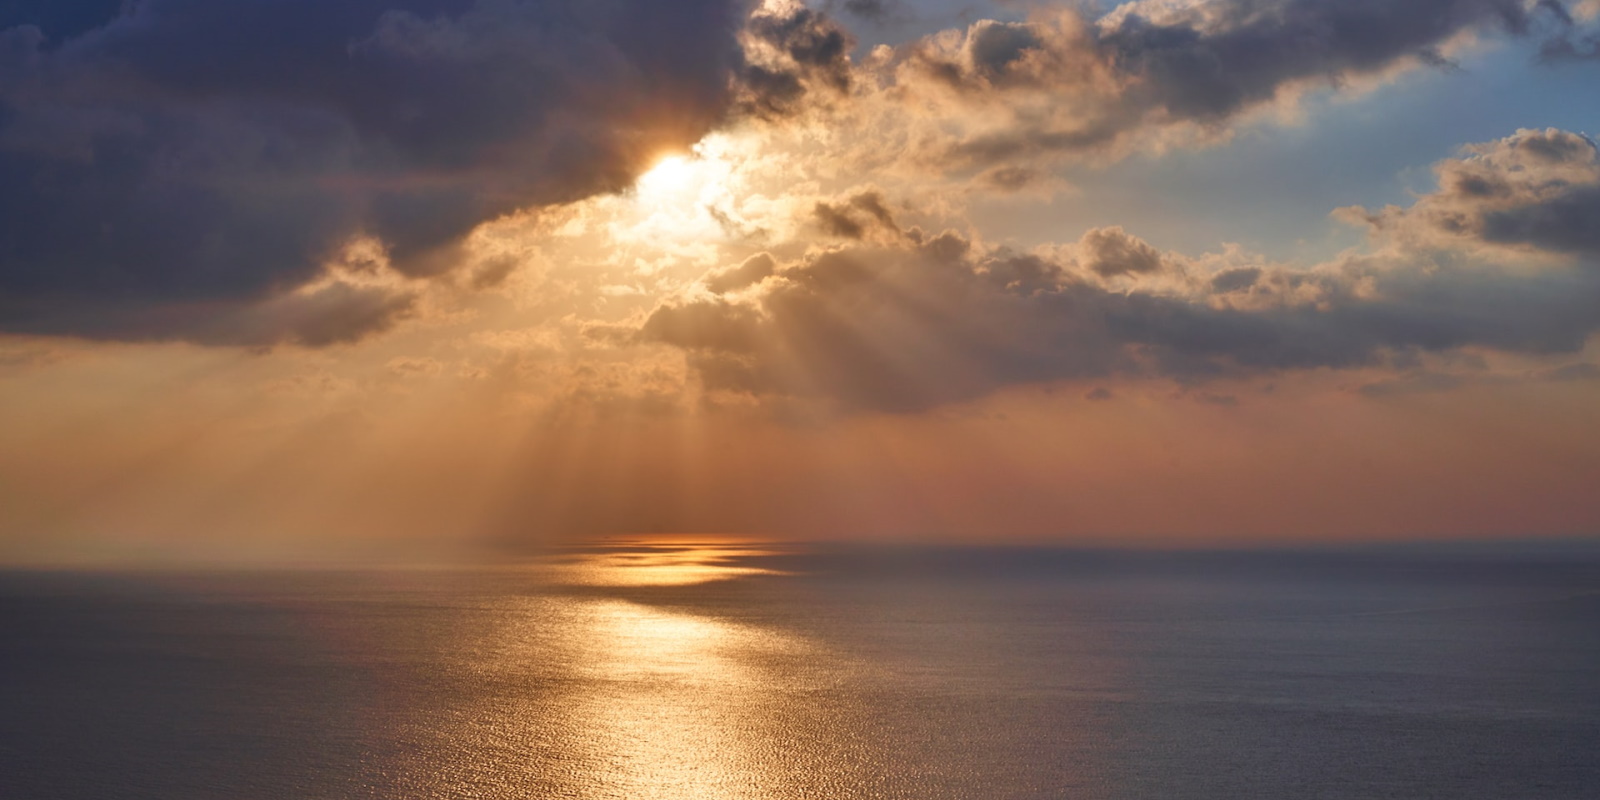 Sun setting over the sea with sunrays seen through clouds.